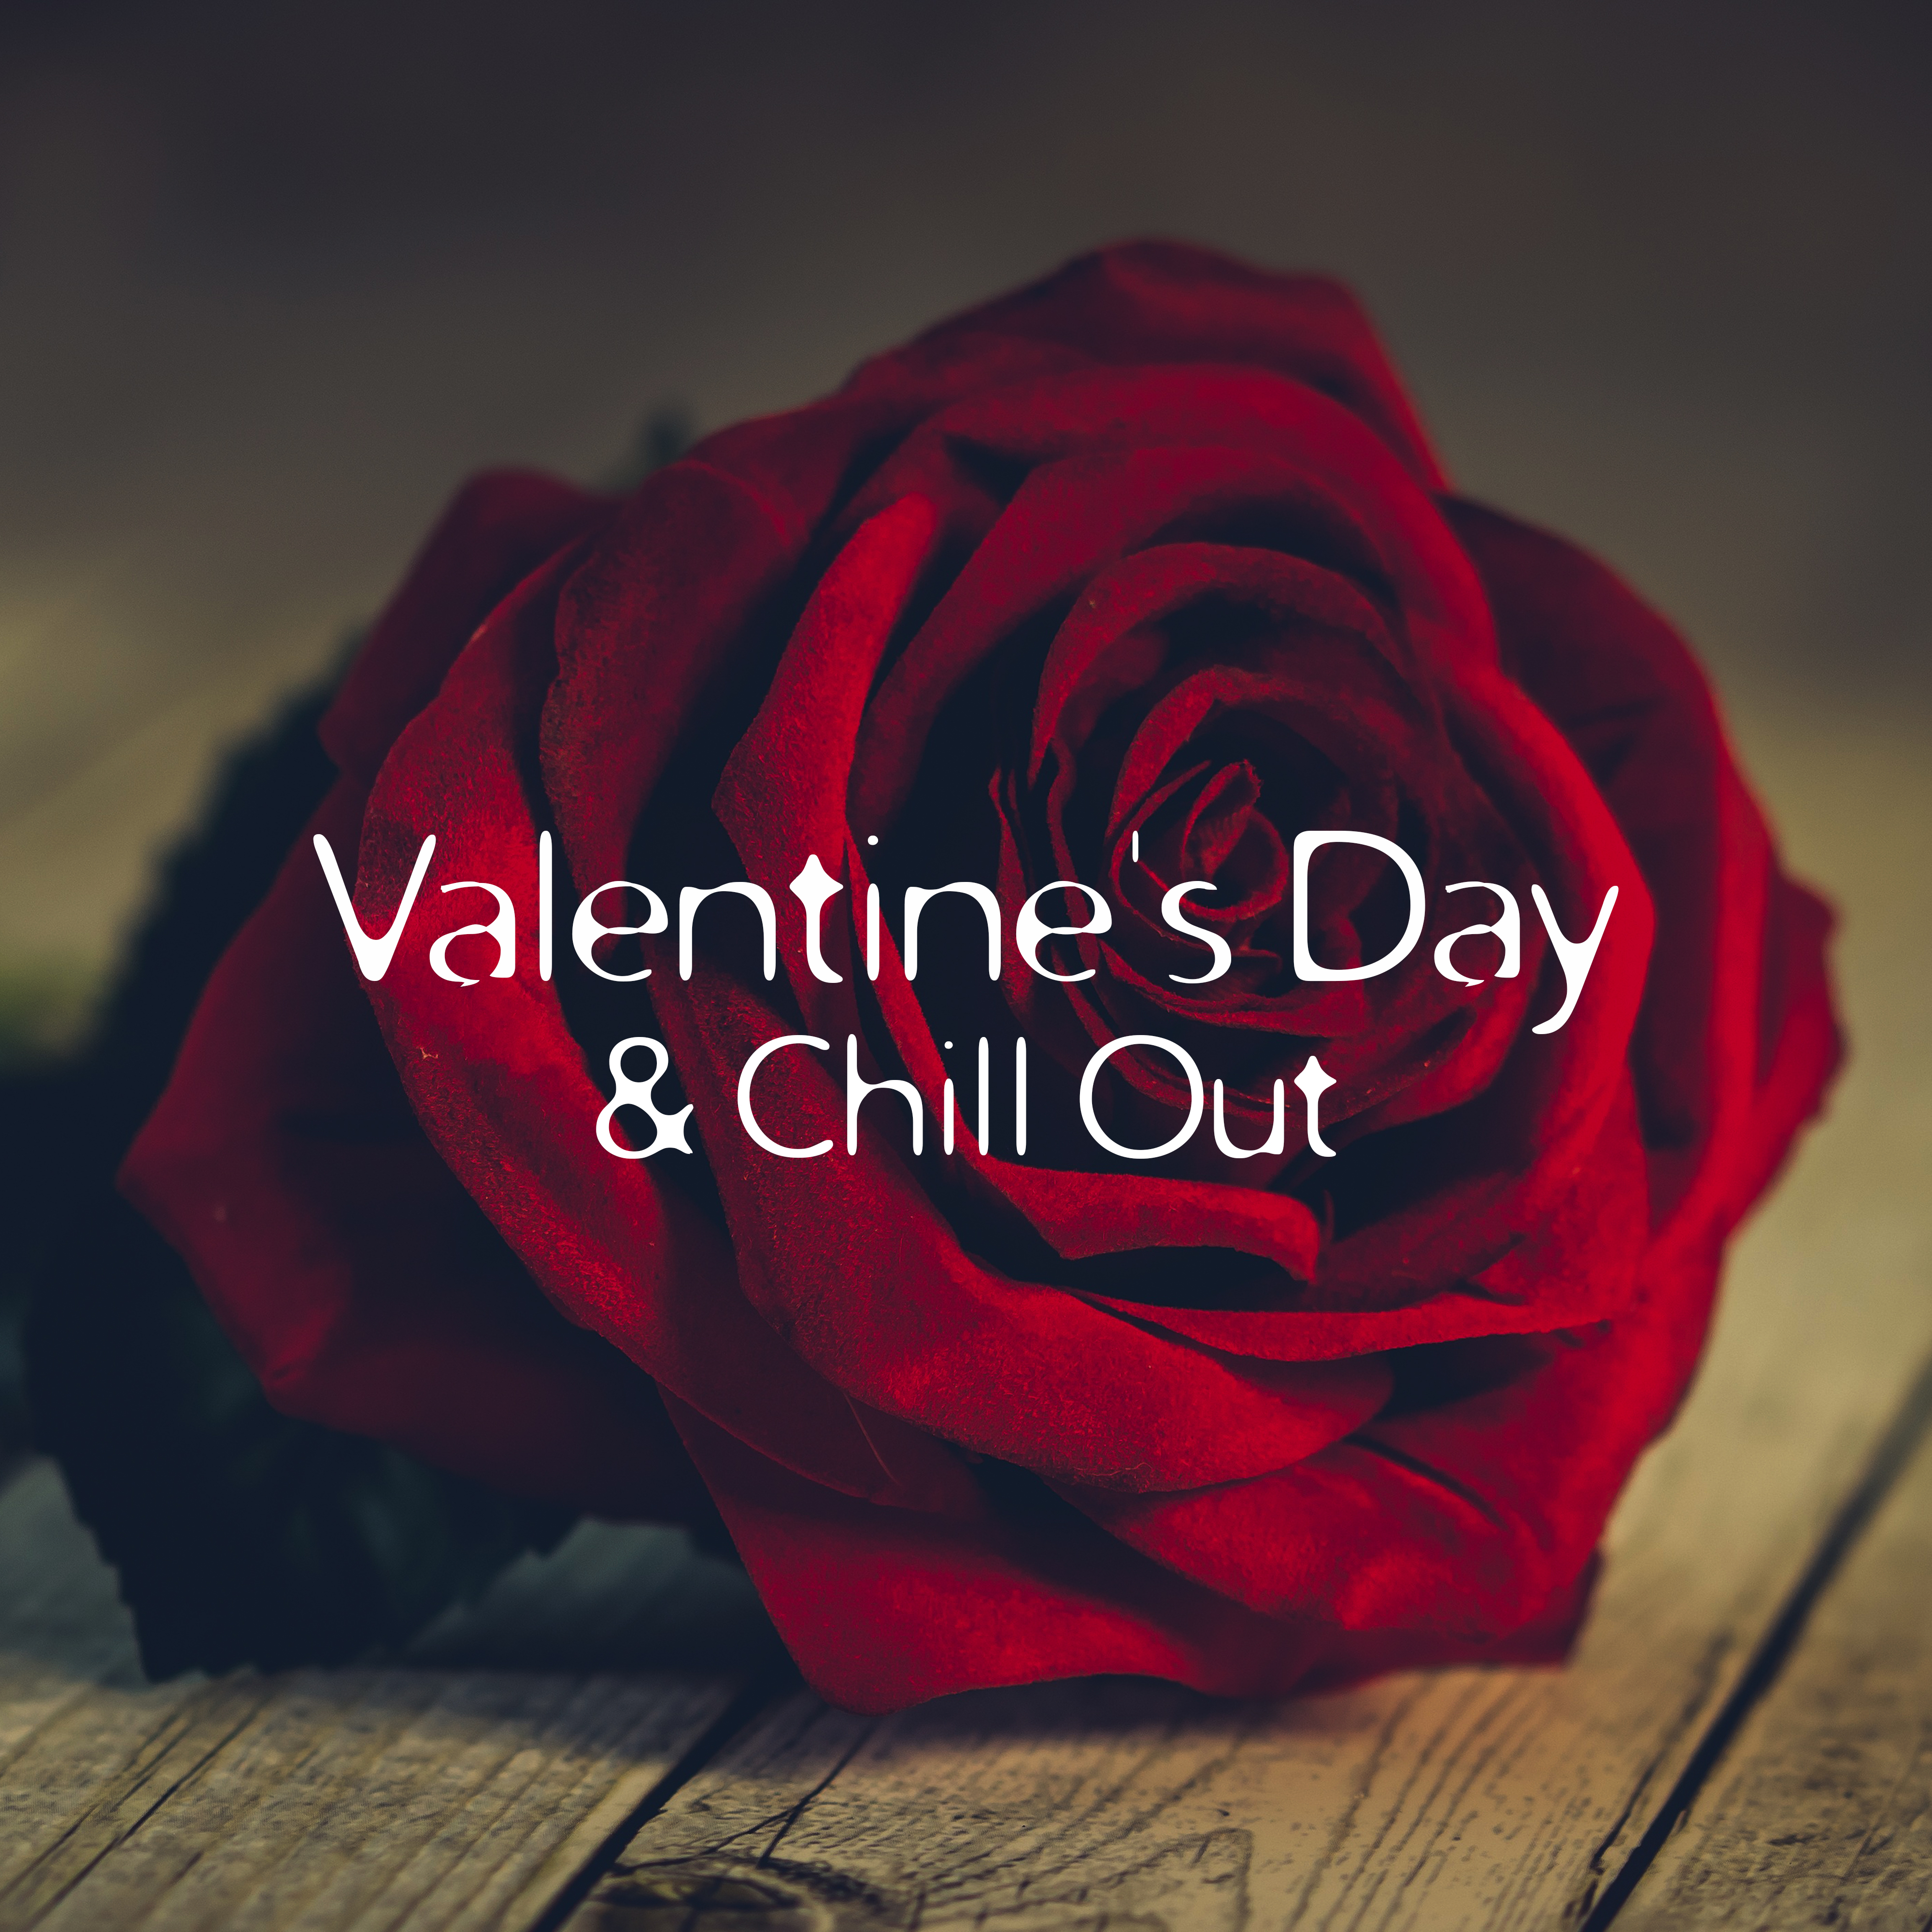 Valentine's Day & Chill Out